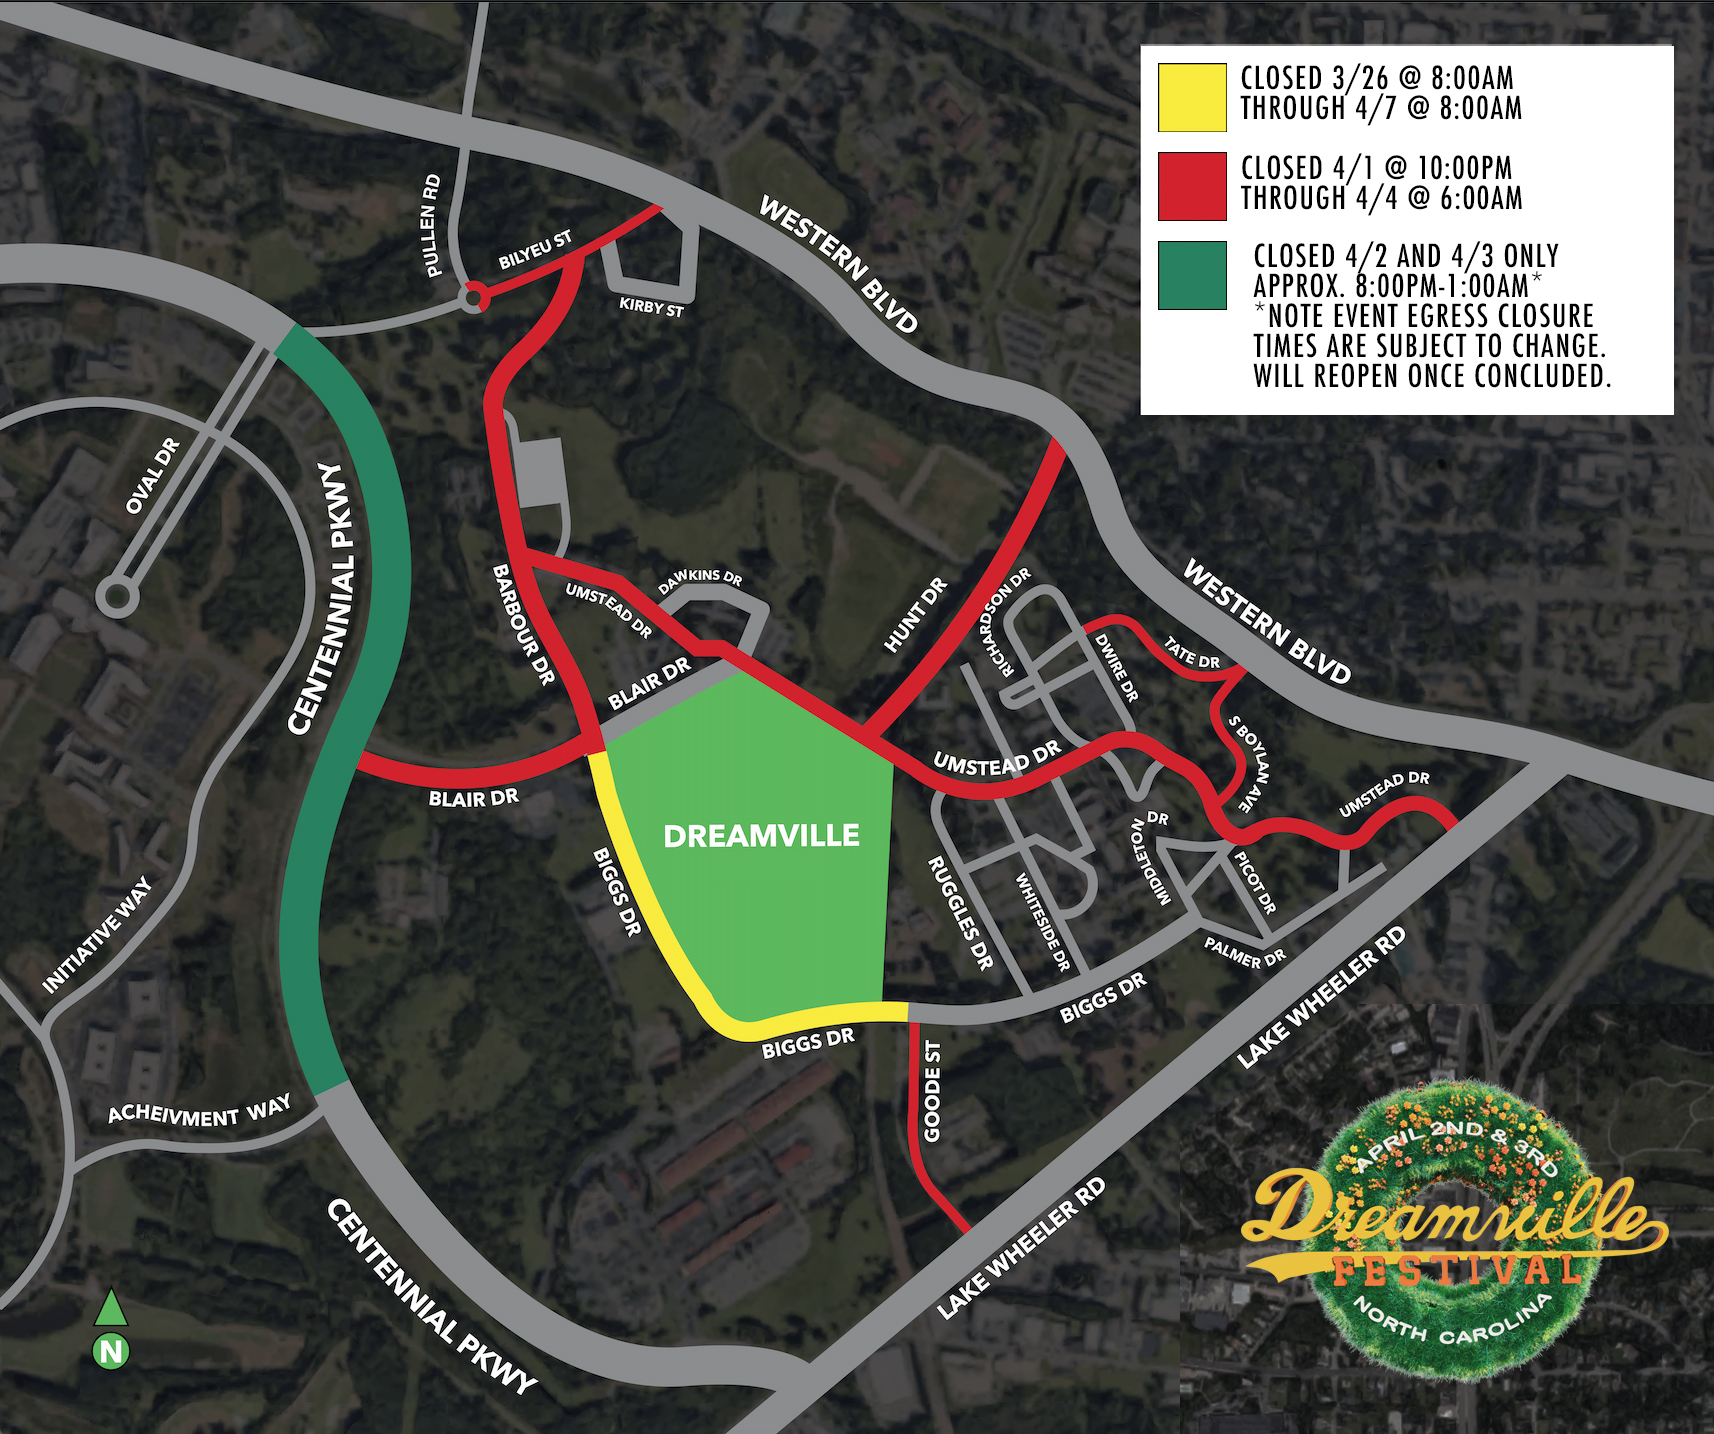 Dreamville Festival 2022 Road Closure Map and Schedule